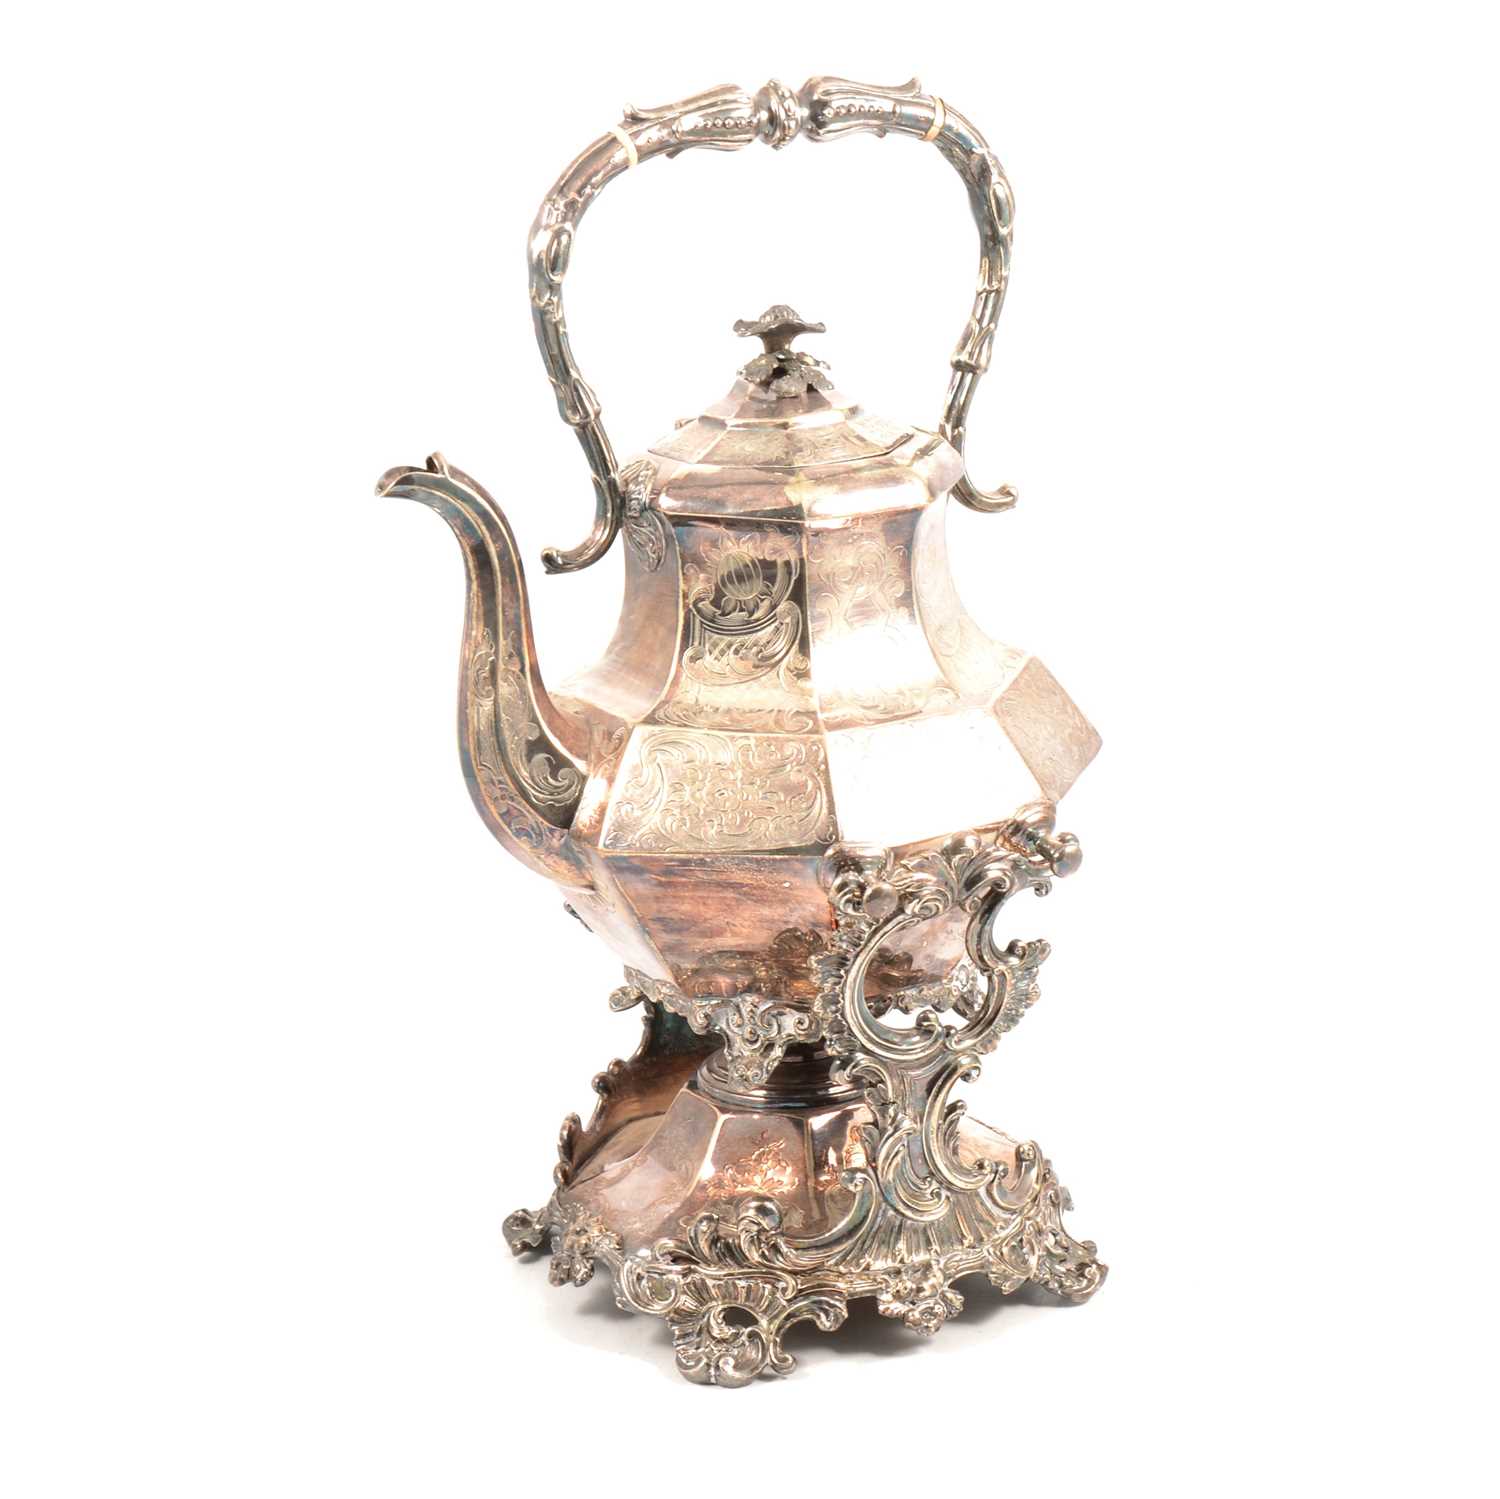 Large Victorian electroplated spirit kettle on stand